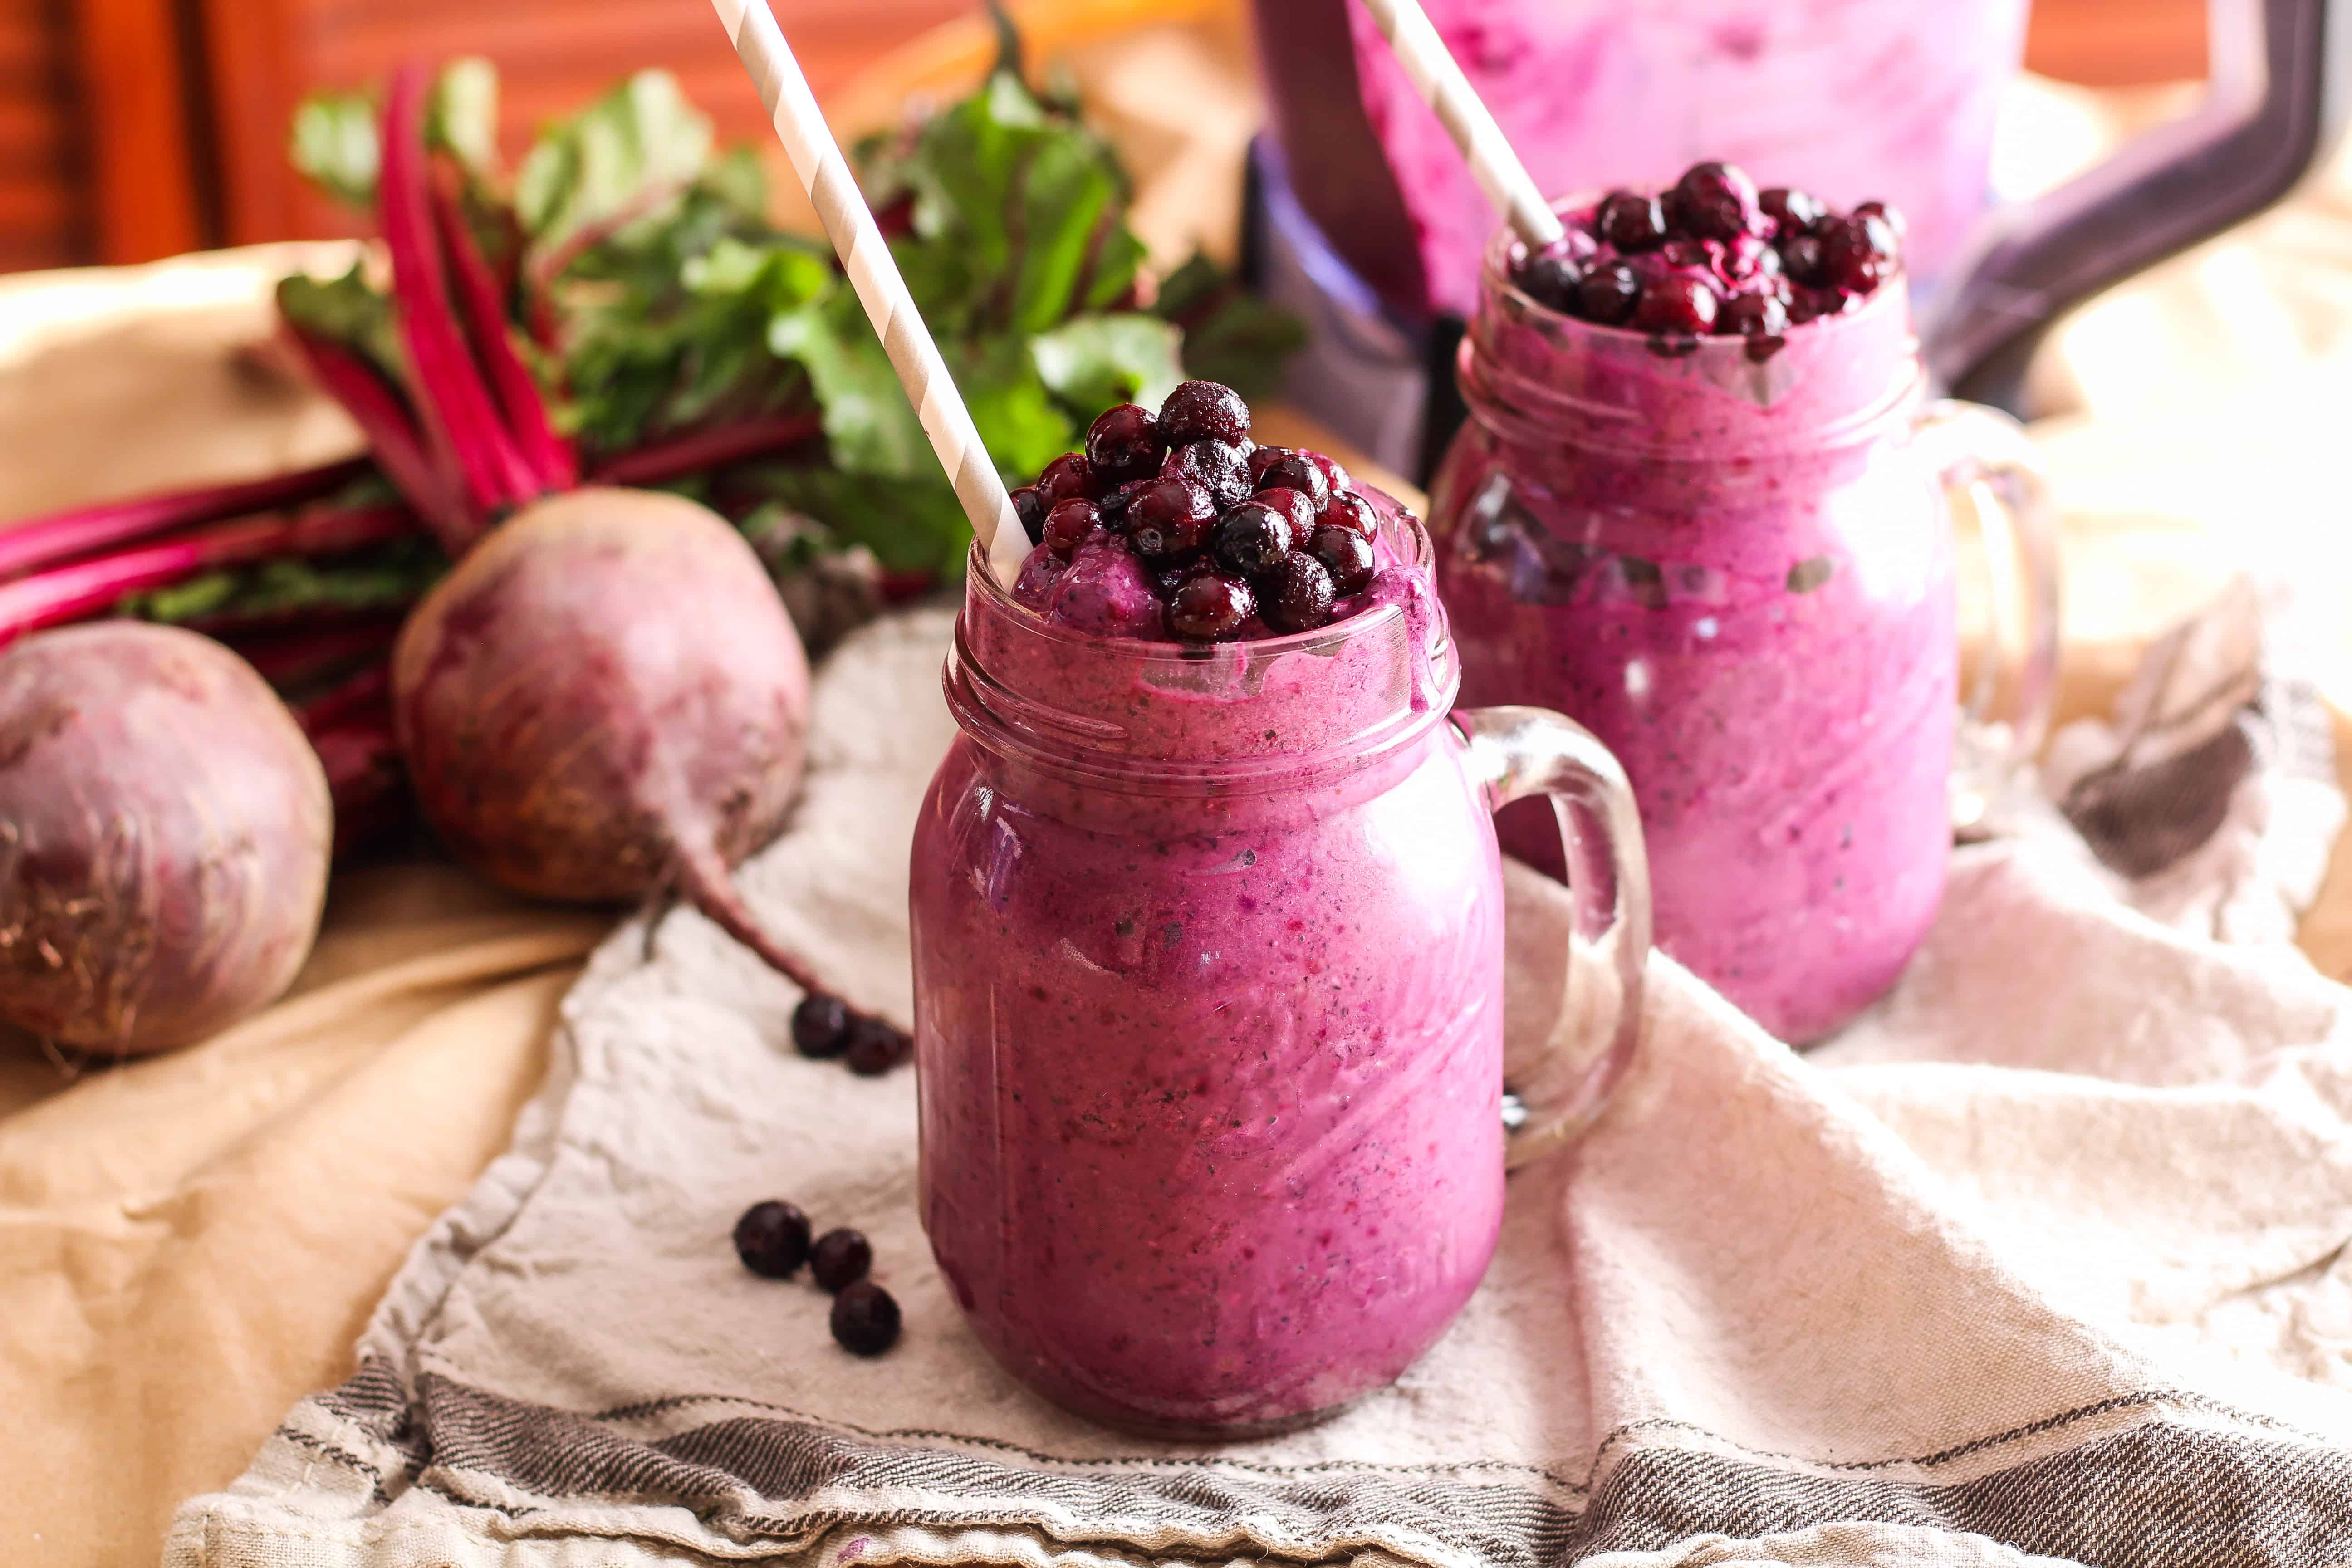 This healthy Wild Blueberry Beet Smoothie is a colorful and nutritious way to start your day with an extra serving of vegetables at breakfast! Dairy-free.